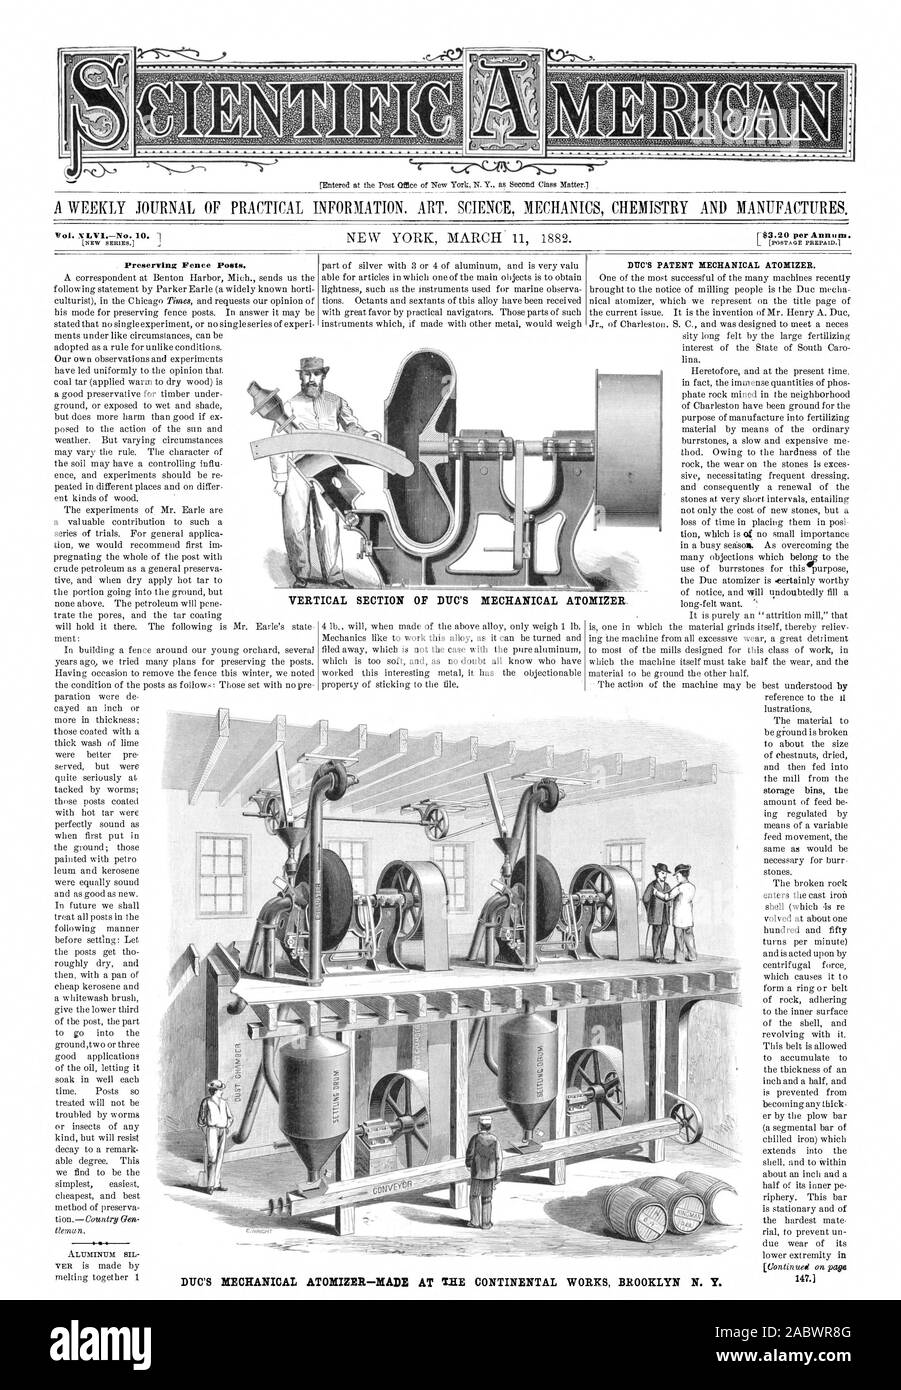 NLV1No. 10. 1 Preserving Fence Posts. DUC'S PATENT MECHANICAL ATOMIZER. VERTICAL SECTION OF DUC'S MECHANICAL ATOMIZER. DUC'S MECHANICAL ATOMIZER—MADE AT VIE CONTINENTAL WORKS BROOKLYN N. Y. 147.], scientific american, 1882-03-11 Stock Photo